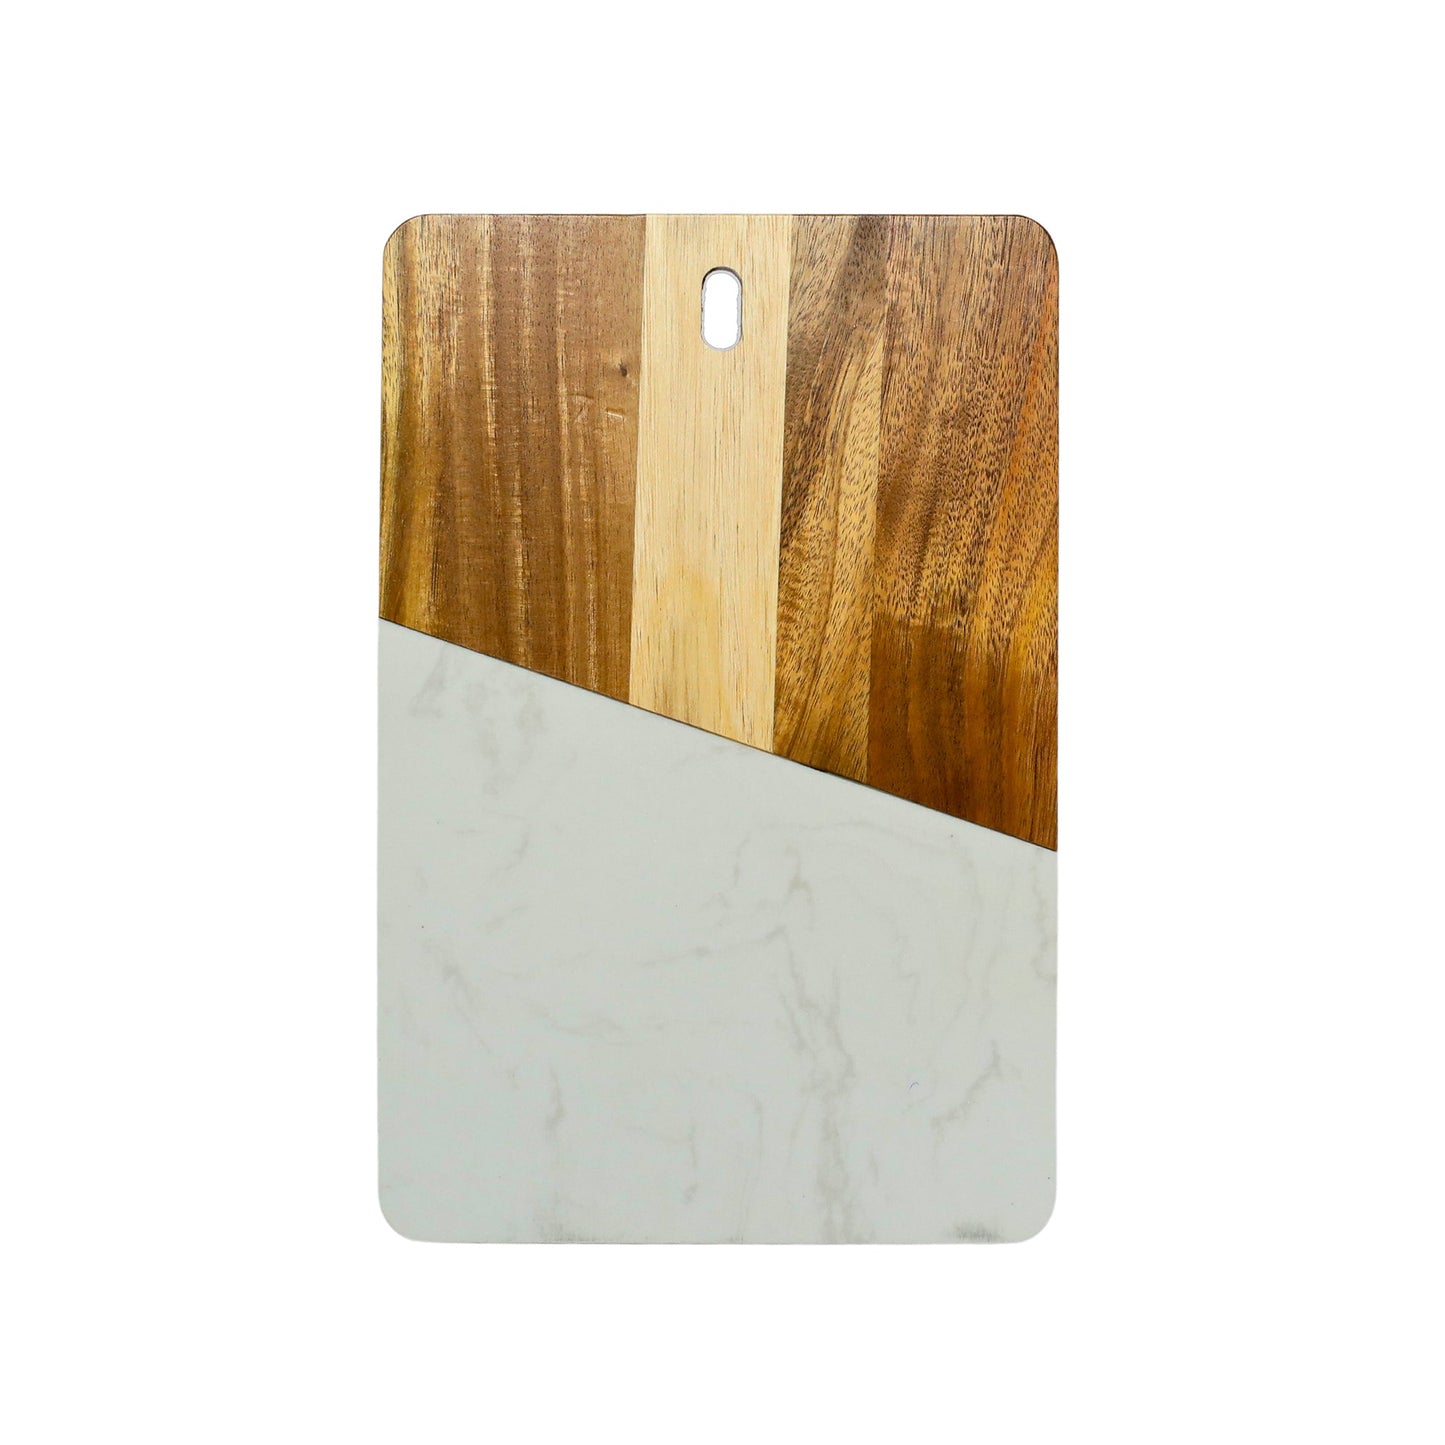 White Marble and Acacia Wood Rectangular Diagonal Board by Creative Gifts